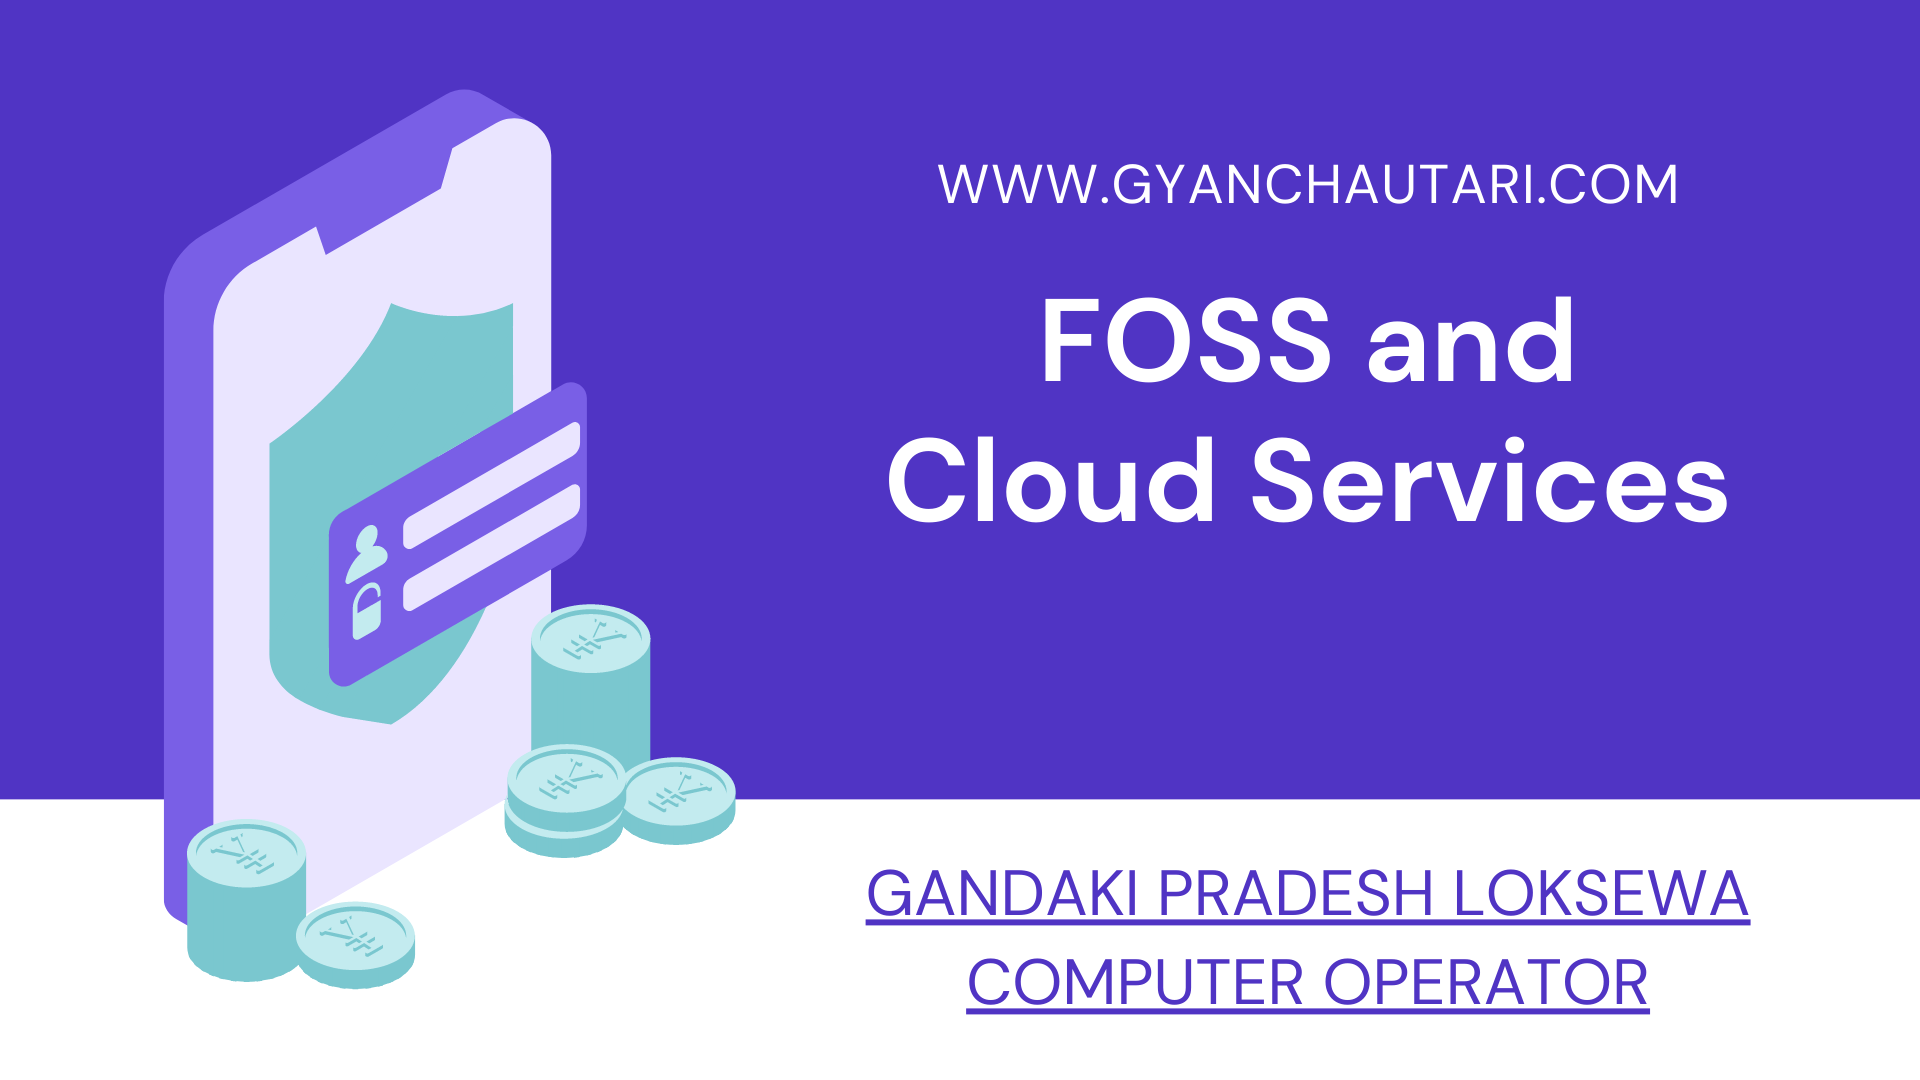 FOSS and Cloud Services